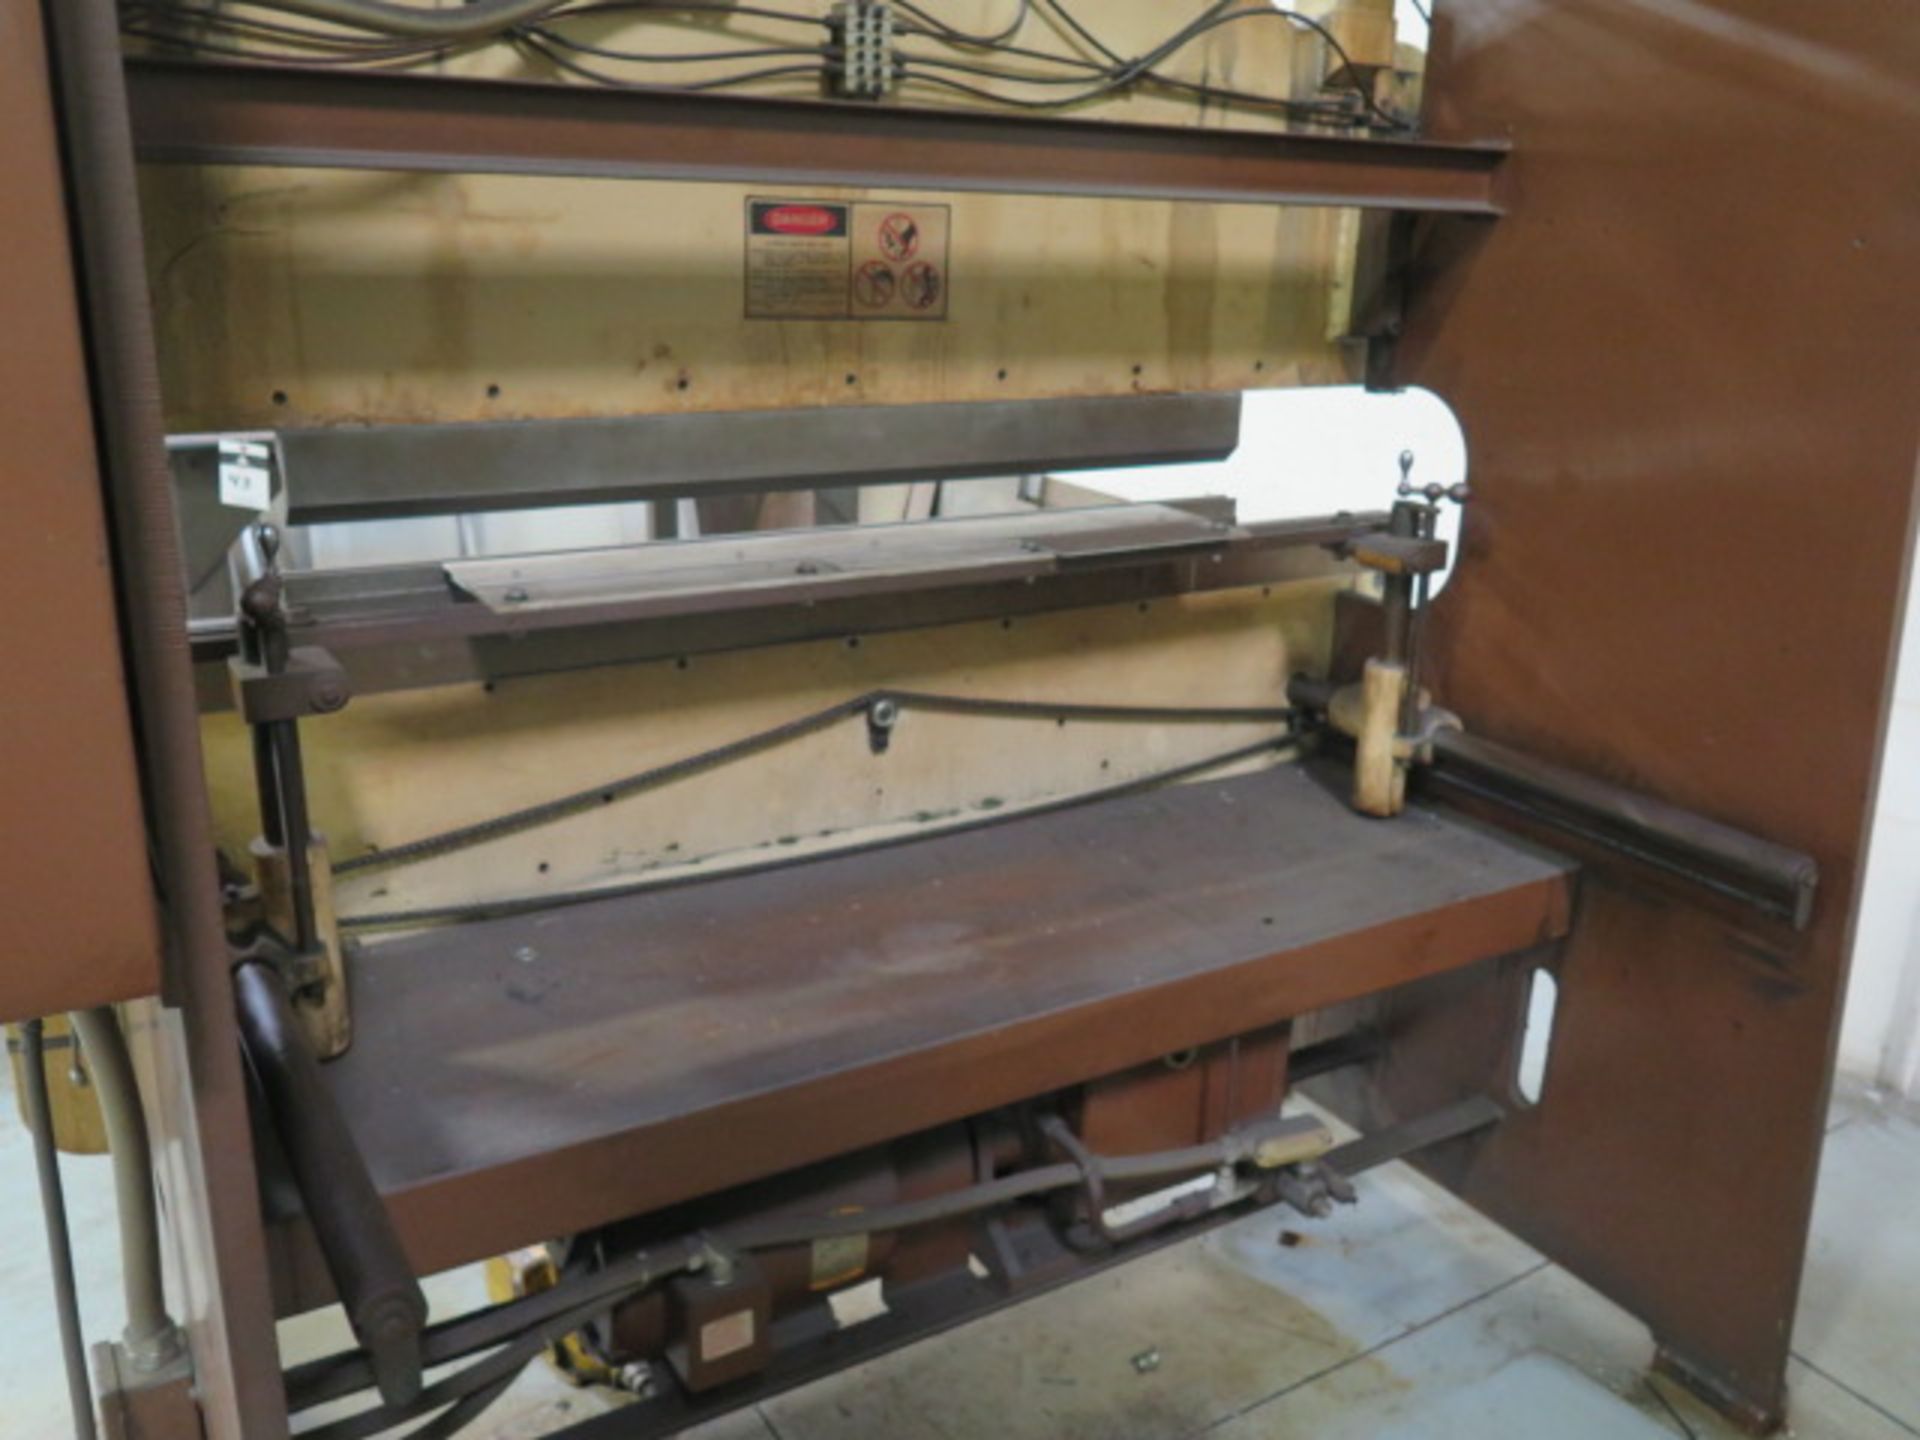 DiAcro 4-7272” Press Brake w/ Dial Back Gage, 72” Length, This Item is Sold AS IS and NO Warranty. - Image 6 of 10